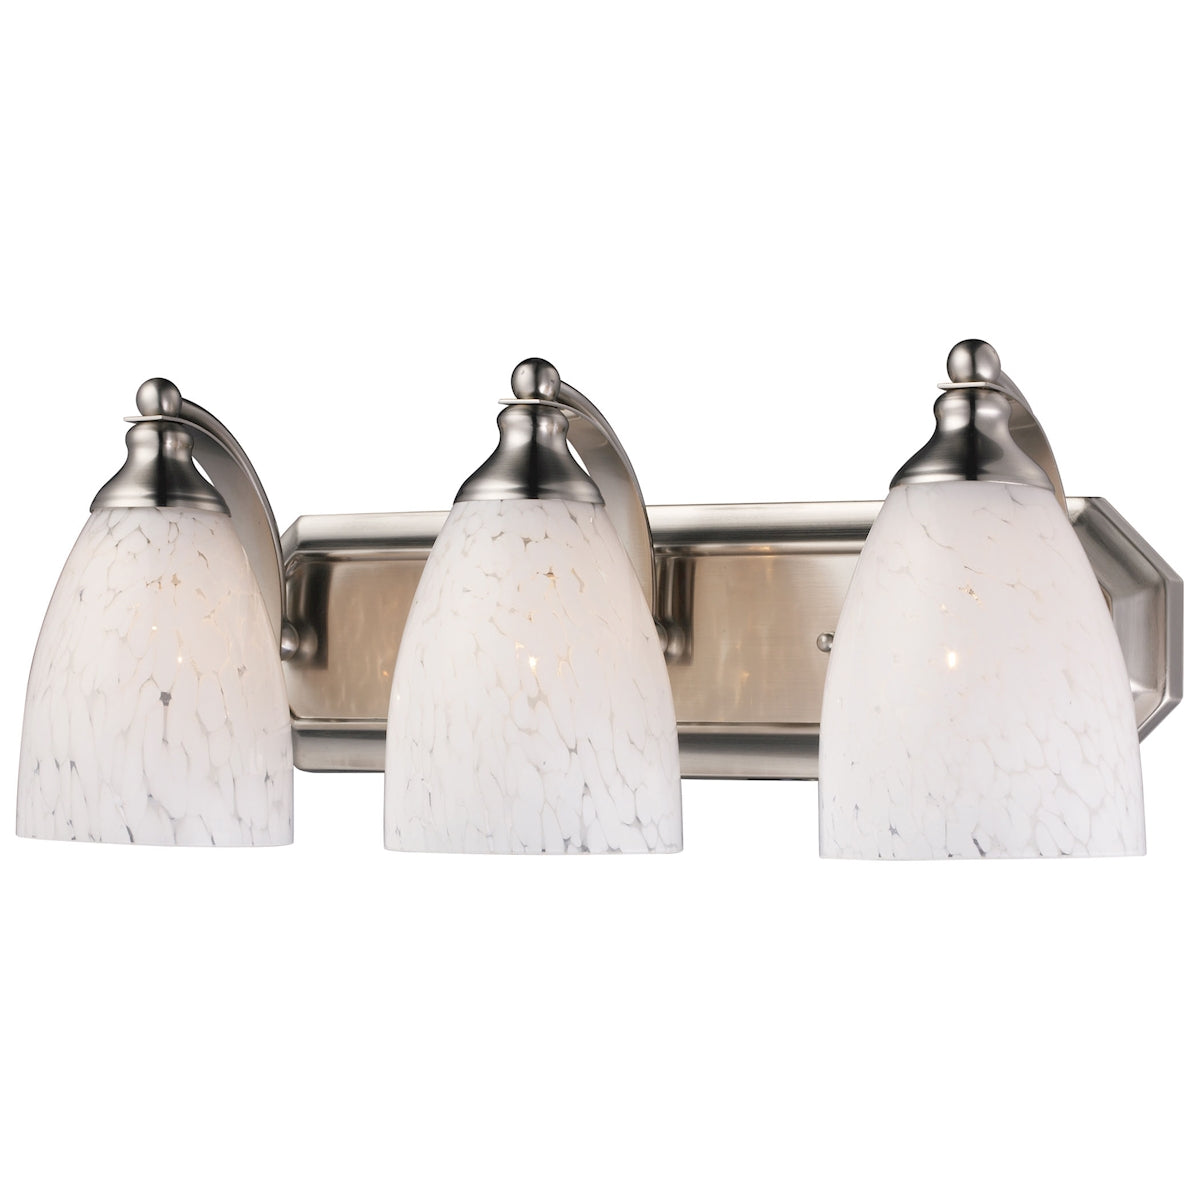 ELK Lighting 570-3N-SW Mix-N-Match Vanity 3-Light Wall Lamp in Satin Nickel with Snow White Glass